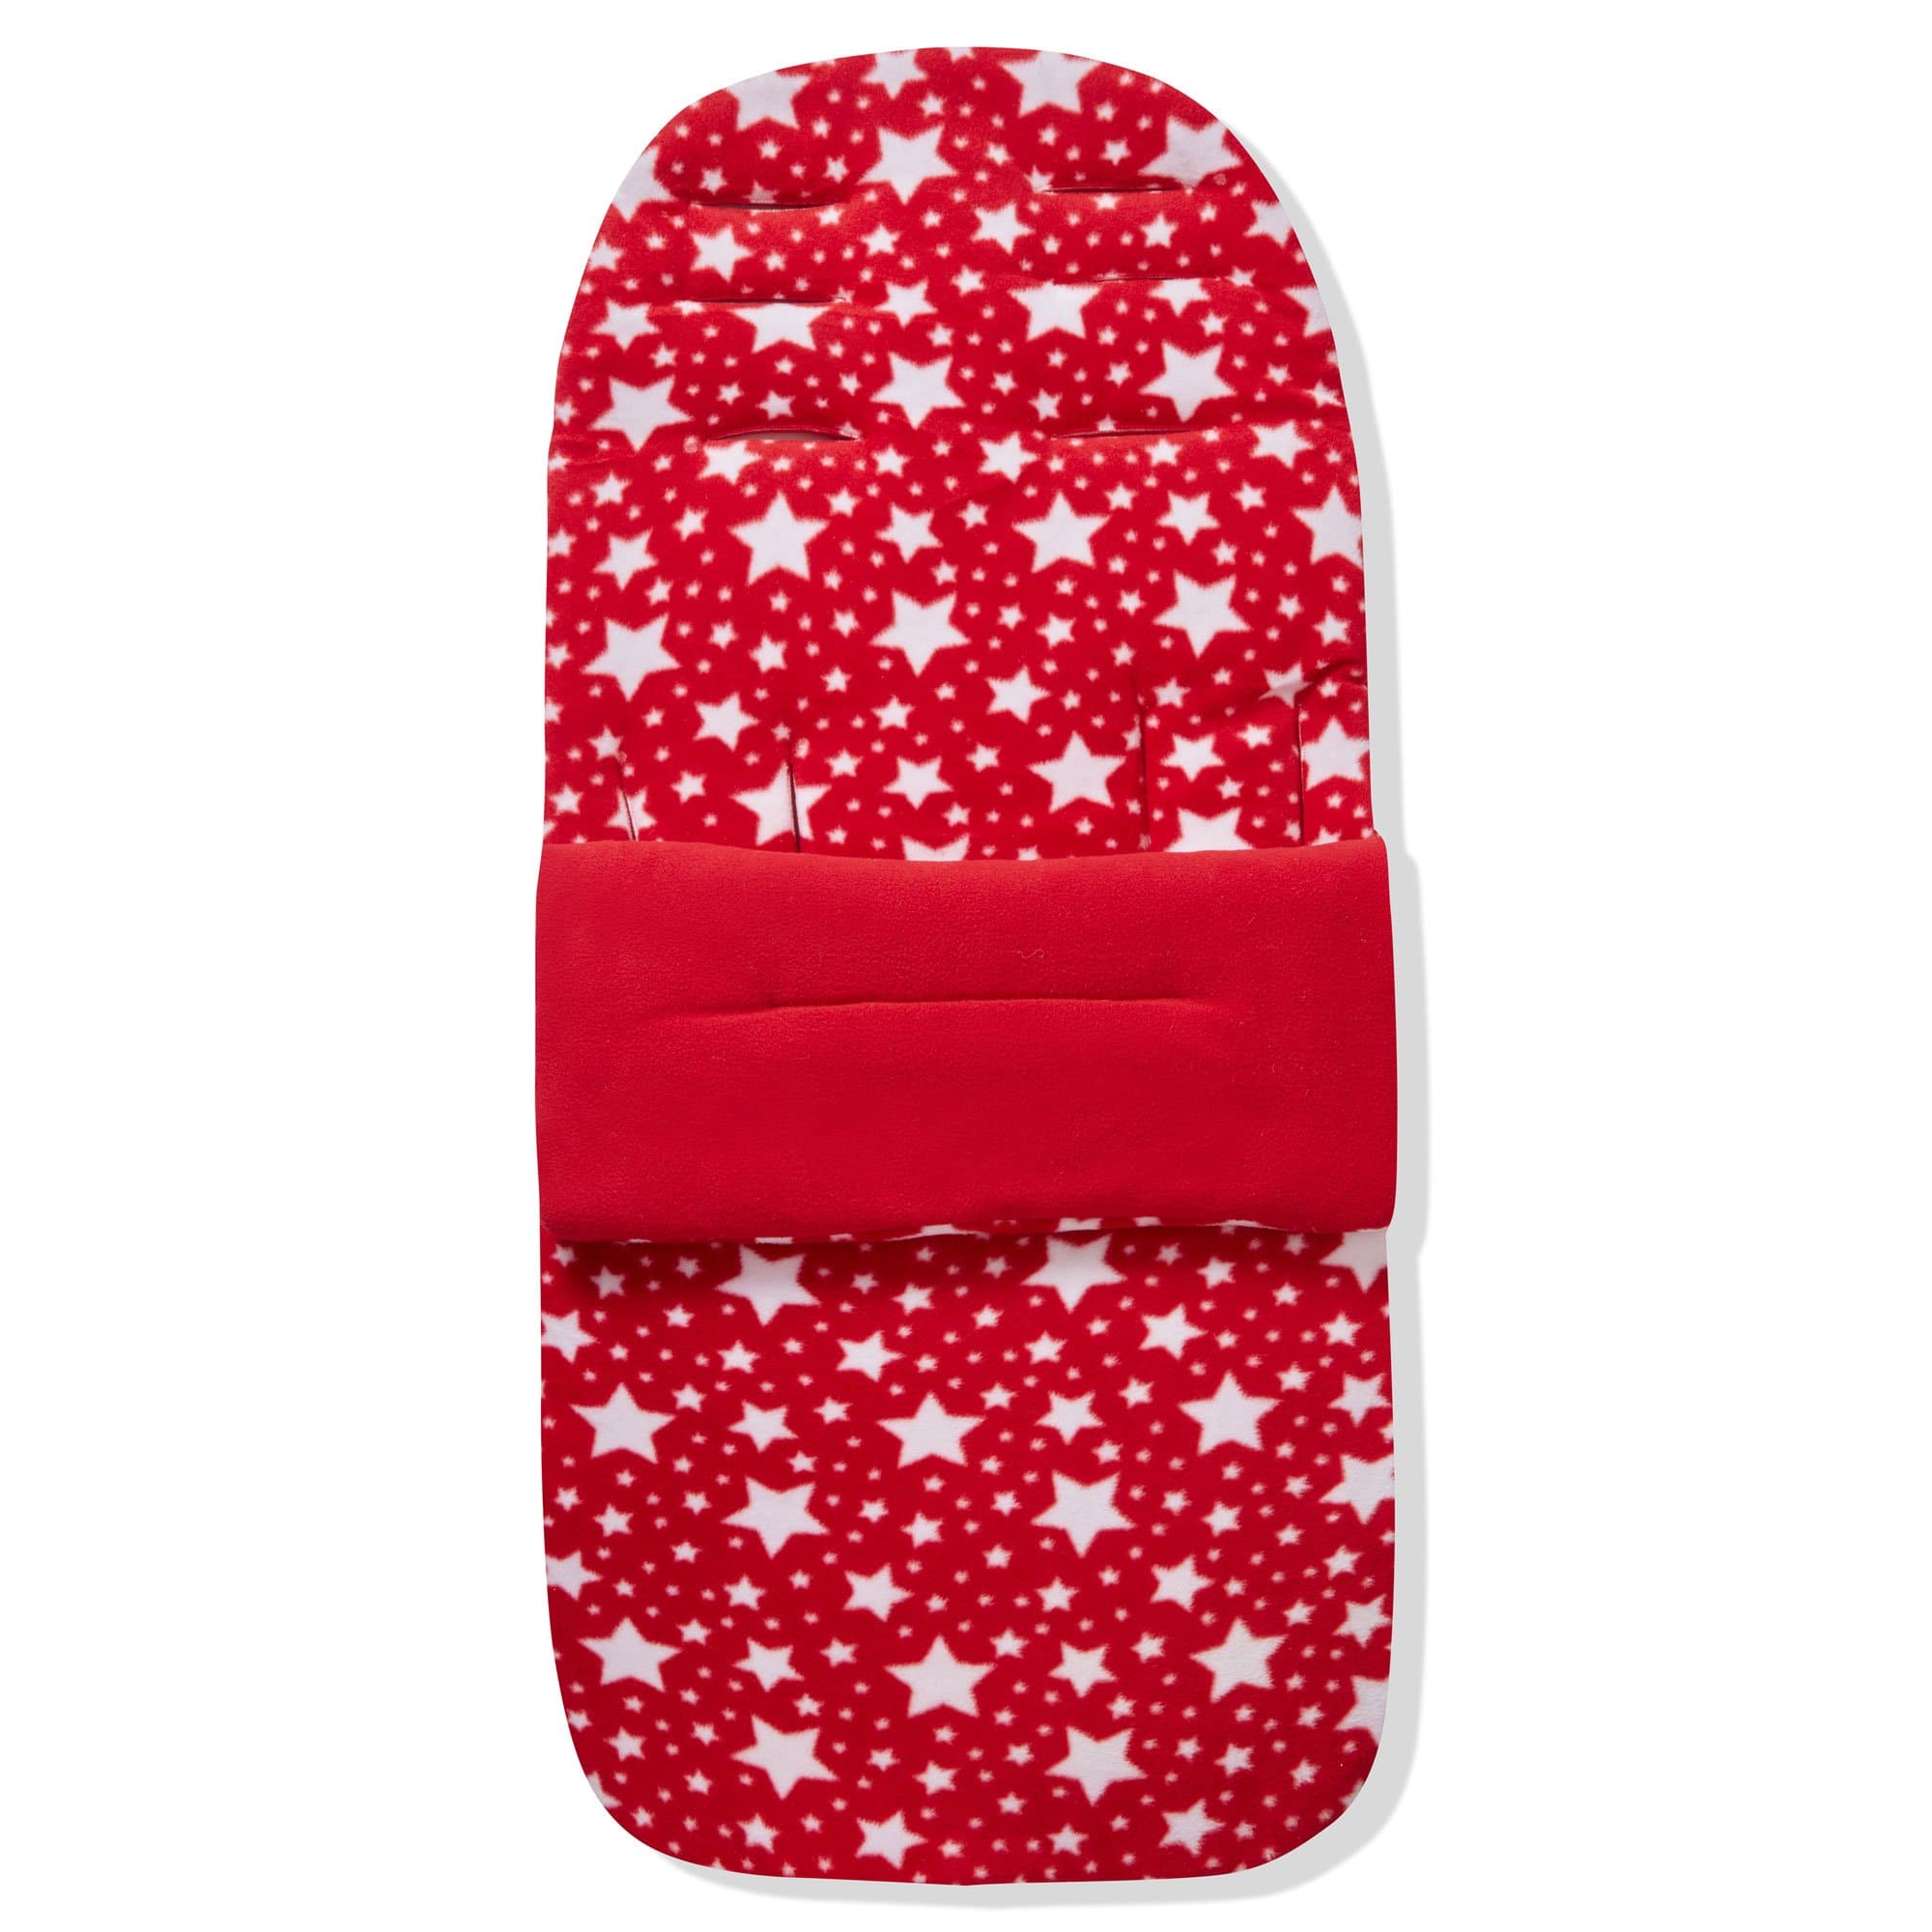 Fleece Footmuff / Cosy Toes Compatible with ABC Design - Red Star / Fits All Models | For Your Little One